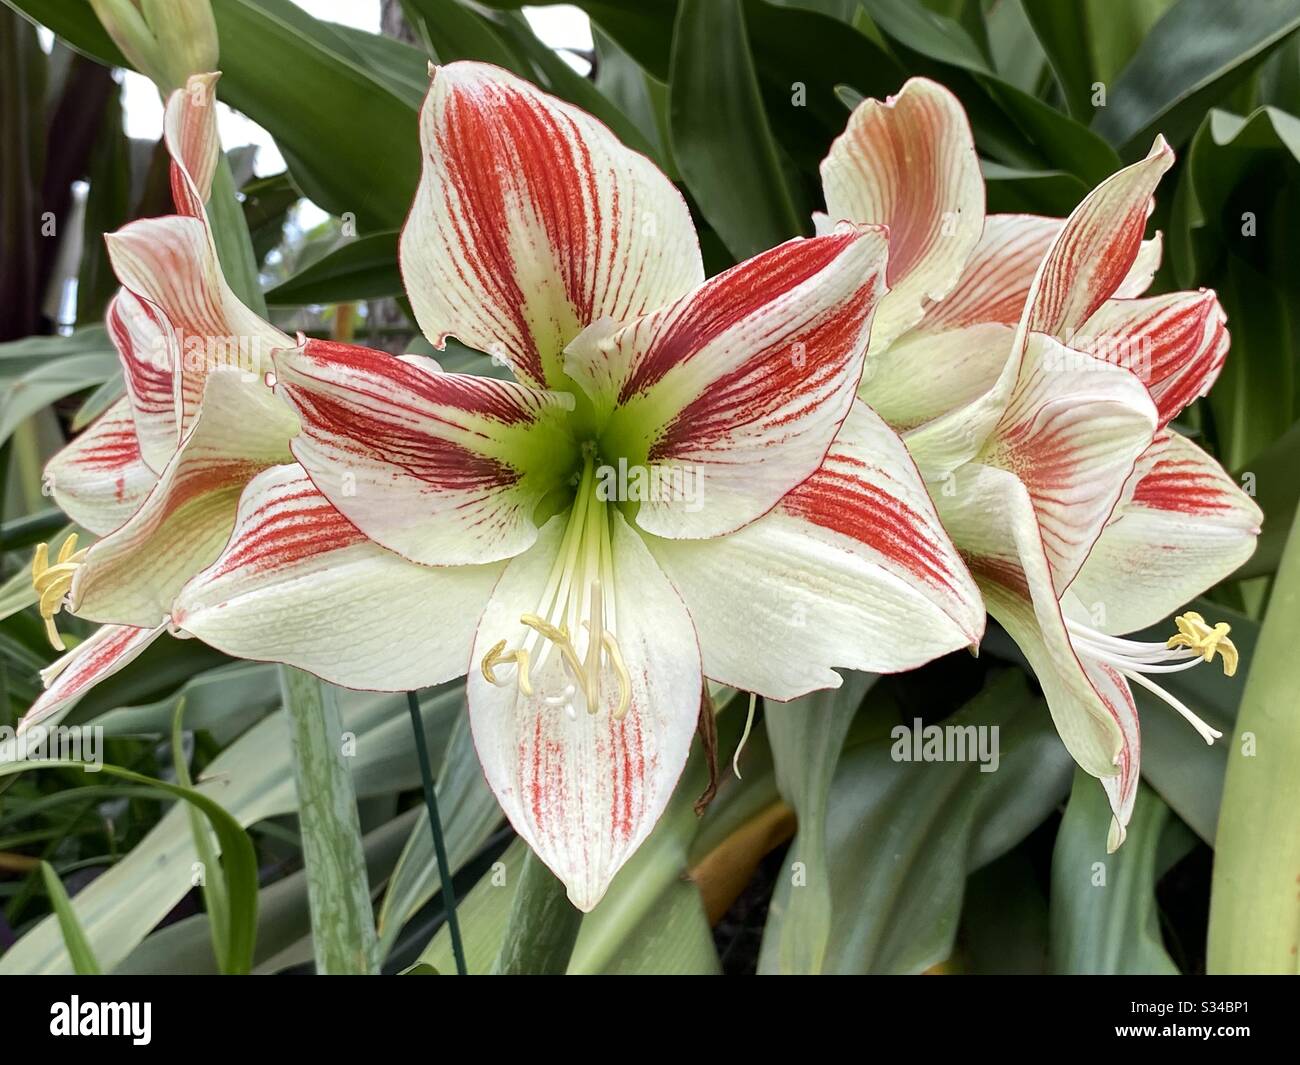 Large candy striped amaryllis flowers in full bloom Stock Photo